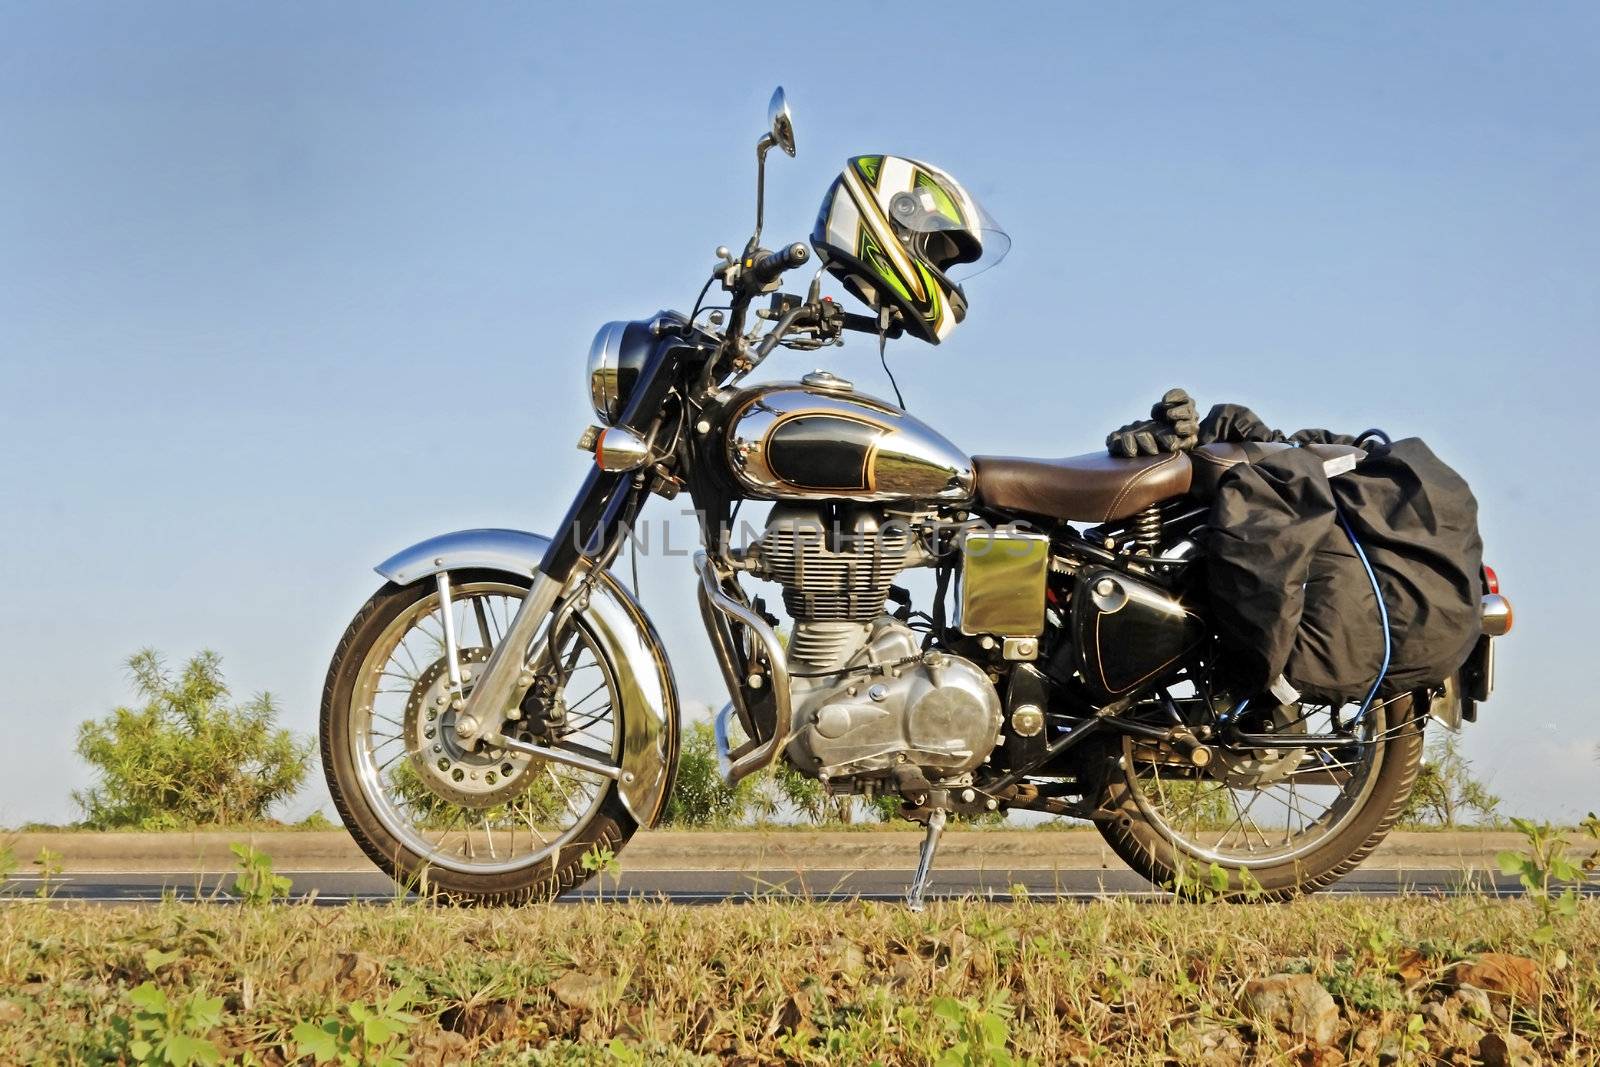 Old style motorcycle parked in a generic highway road rural scene. Location of shot is Maharashtra India